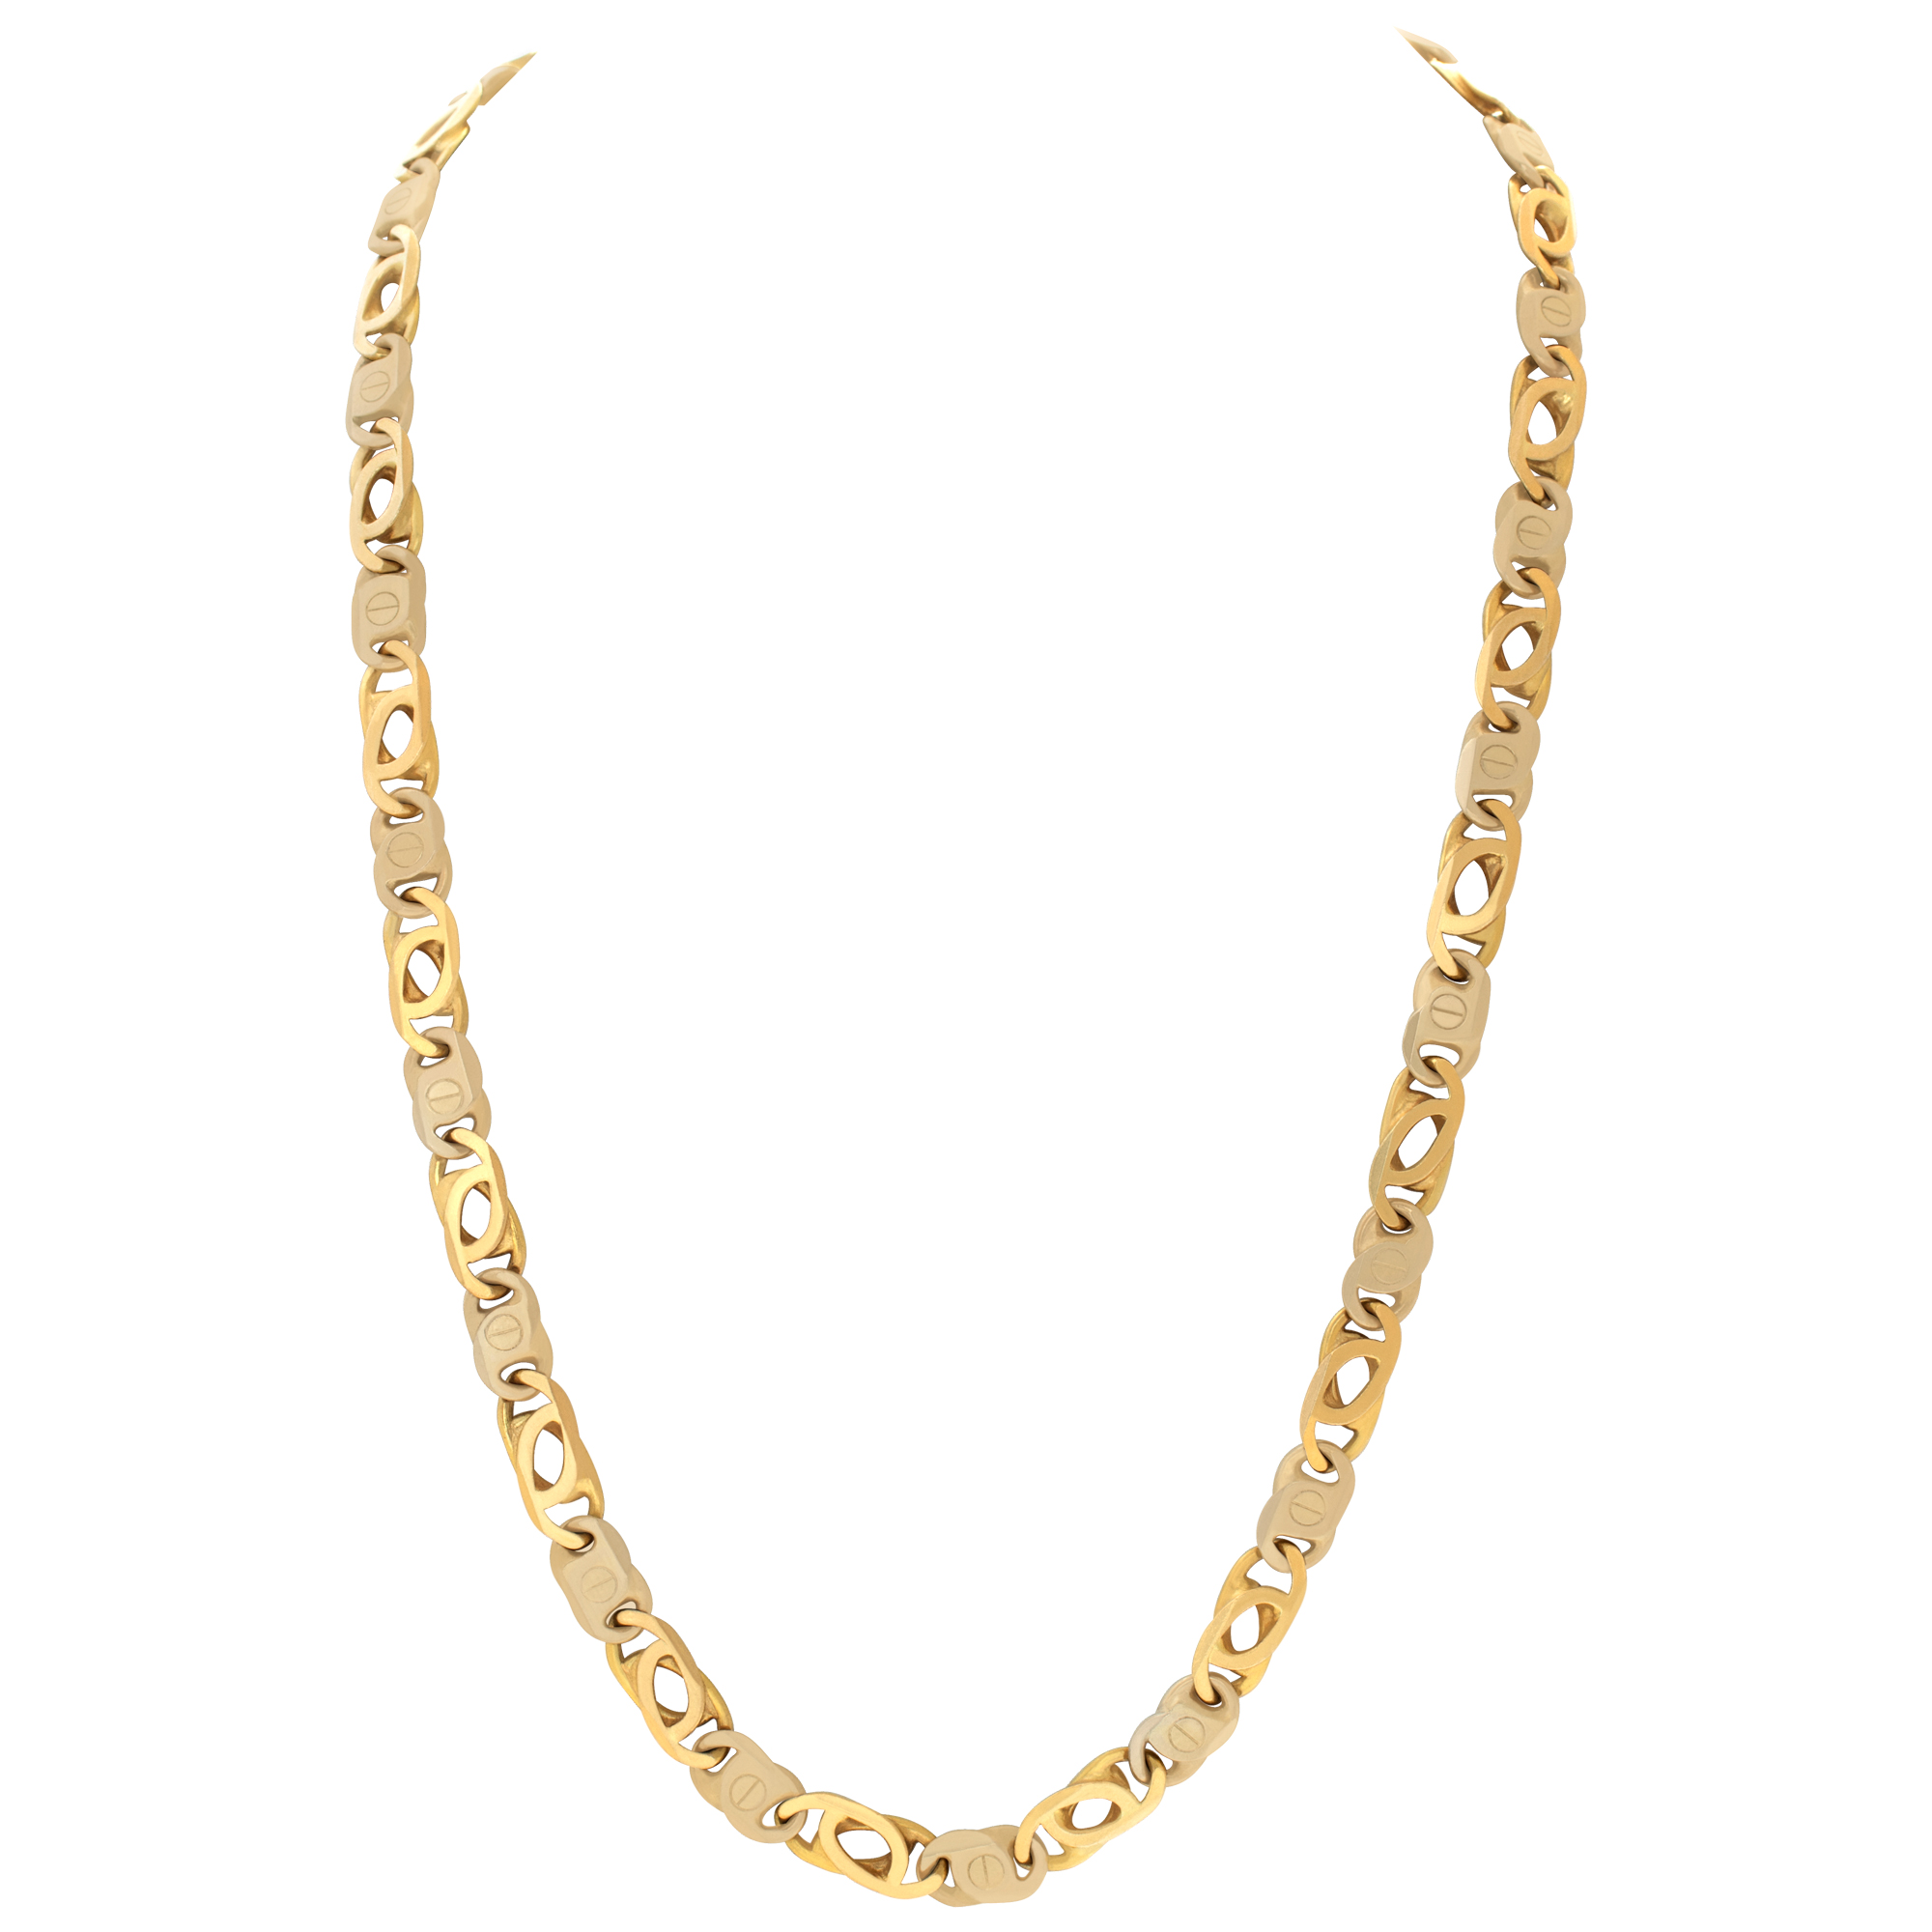 Heavy 18k gold chain with unique link designs image 1